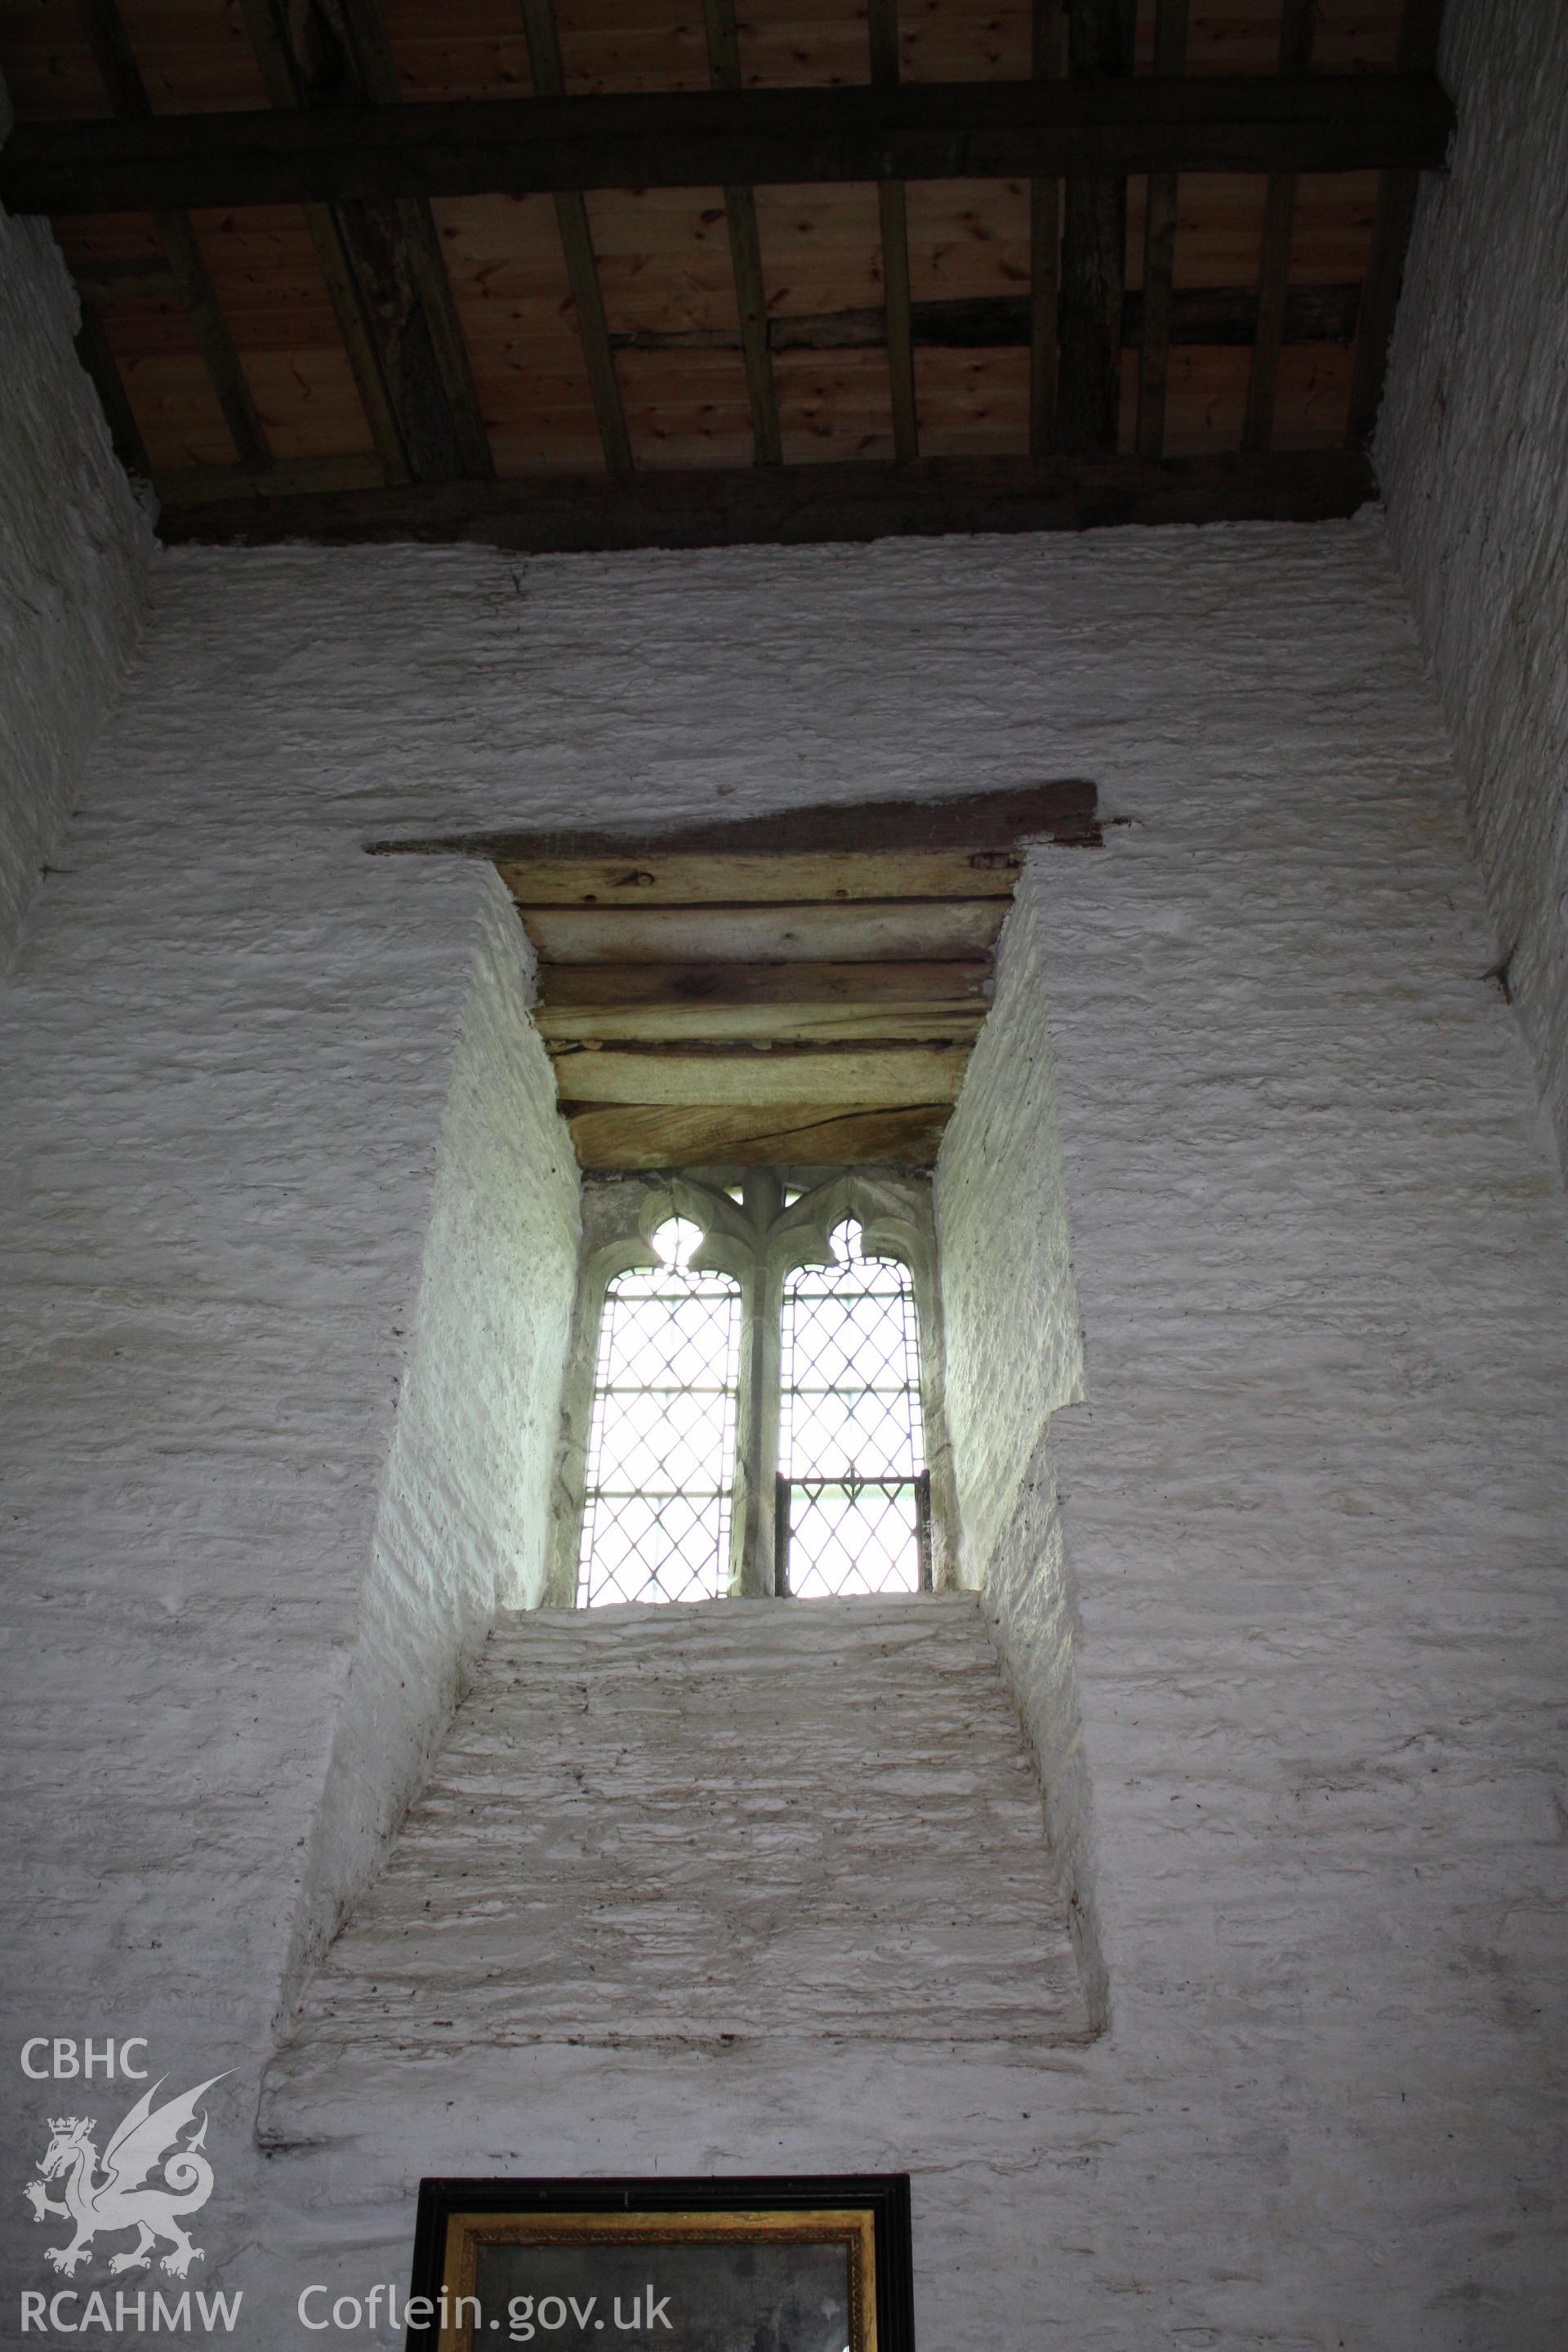 St Mary's Church, Pilleth. Interior view of the tower window.